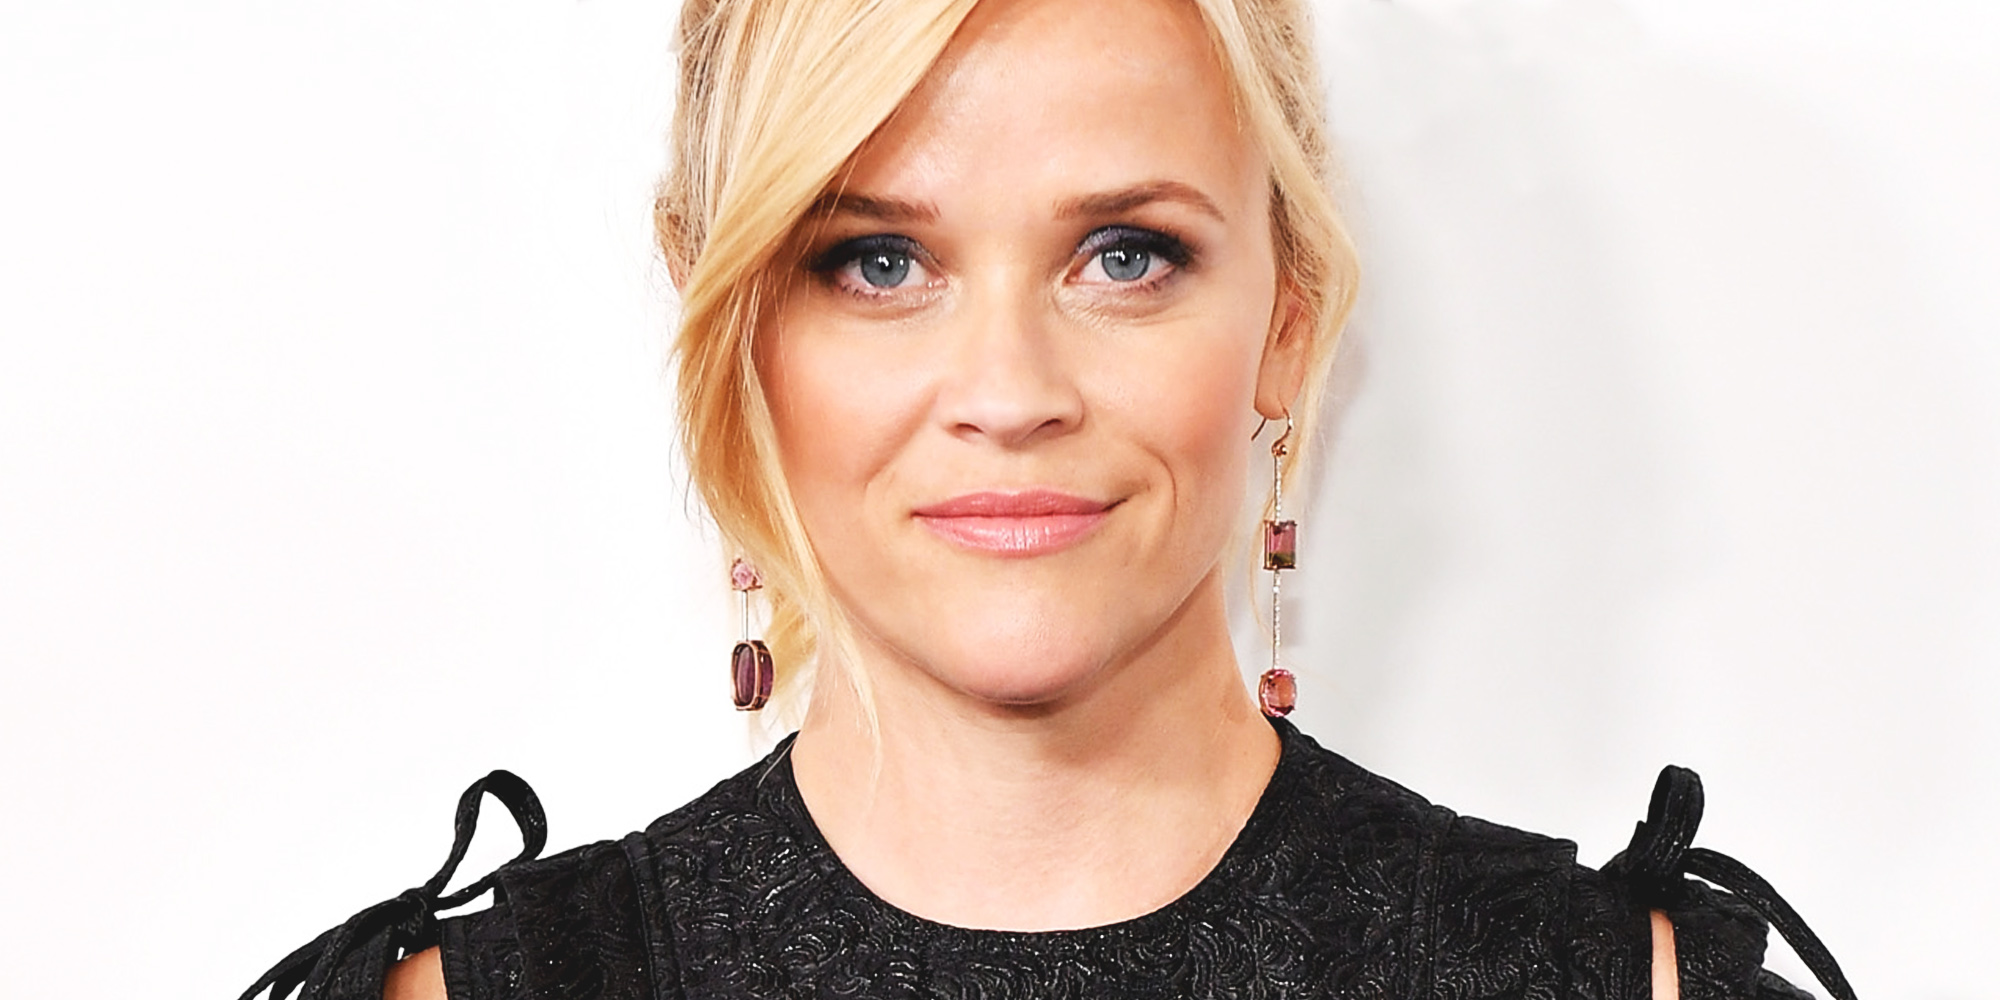 elle-reese-witherspoon-shares-assualt-story-2-1508264551